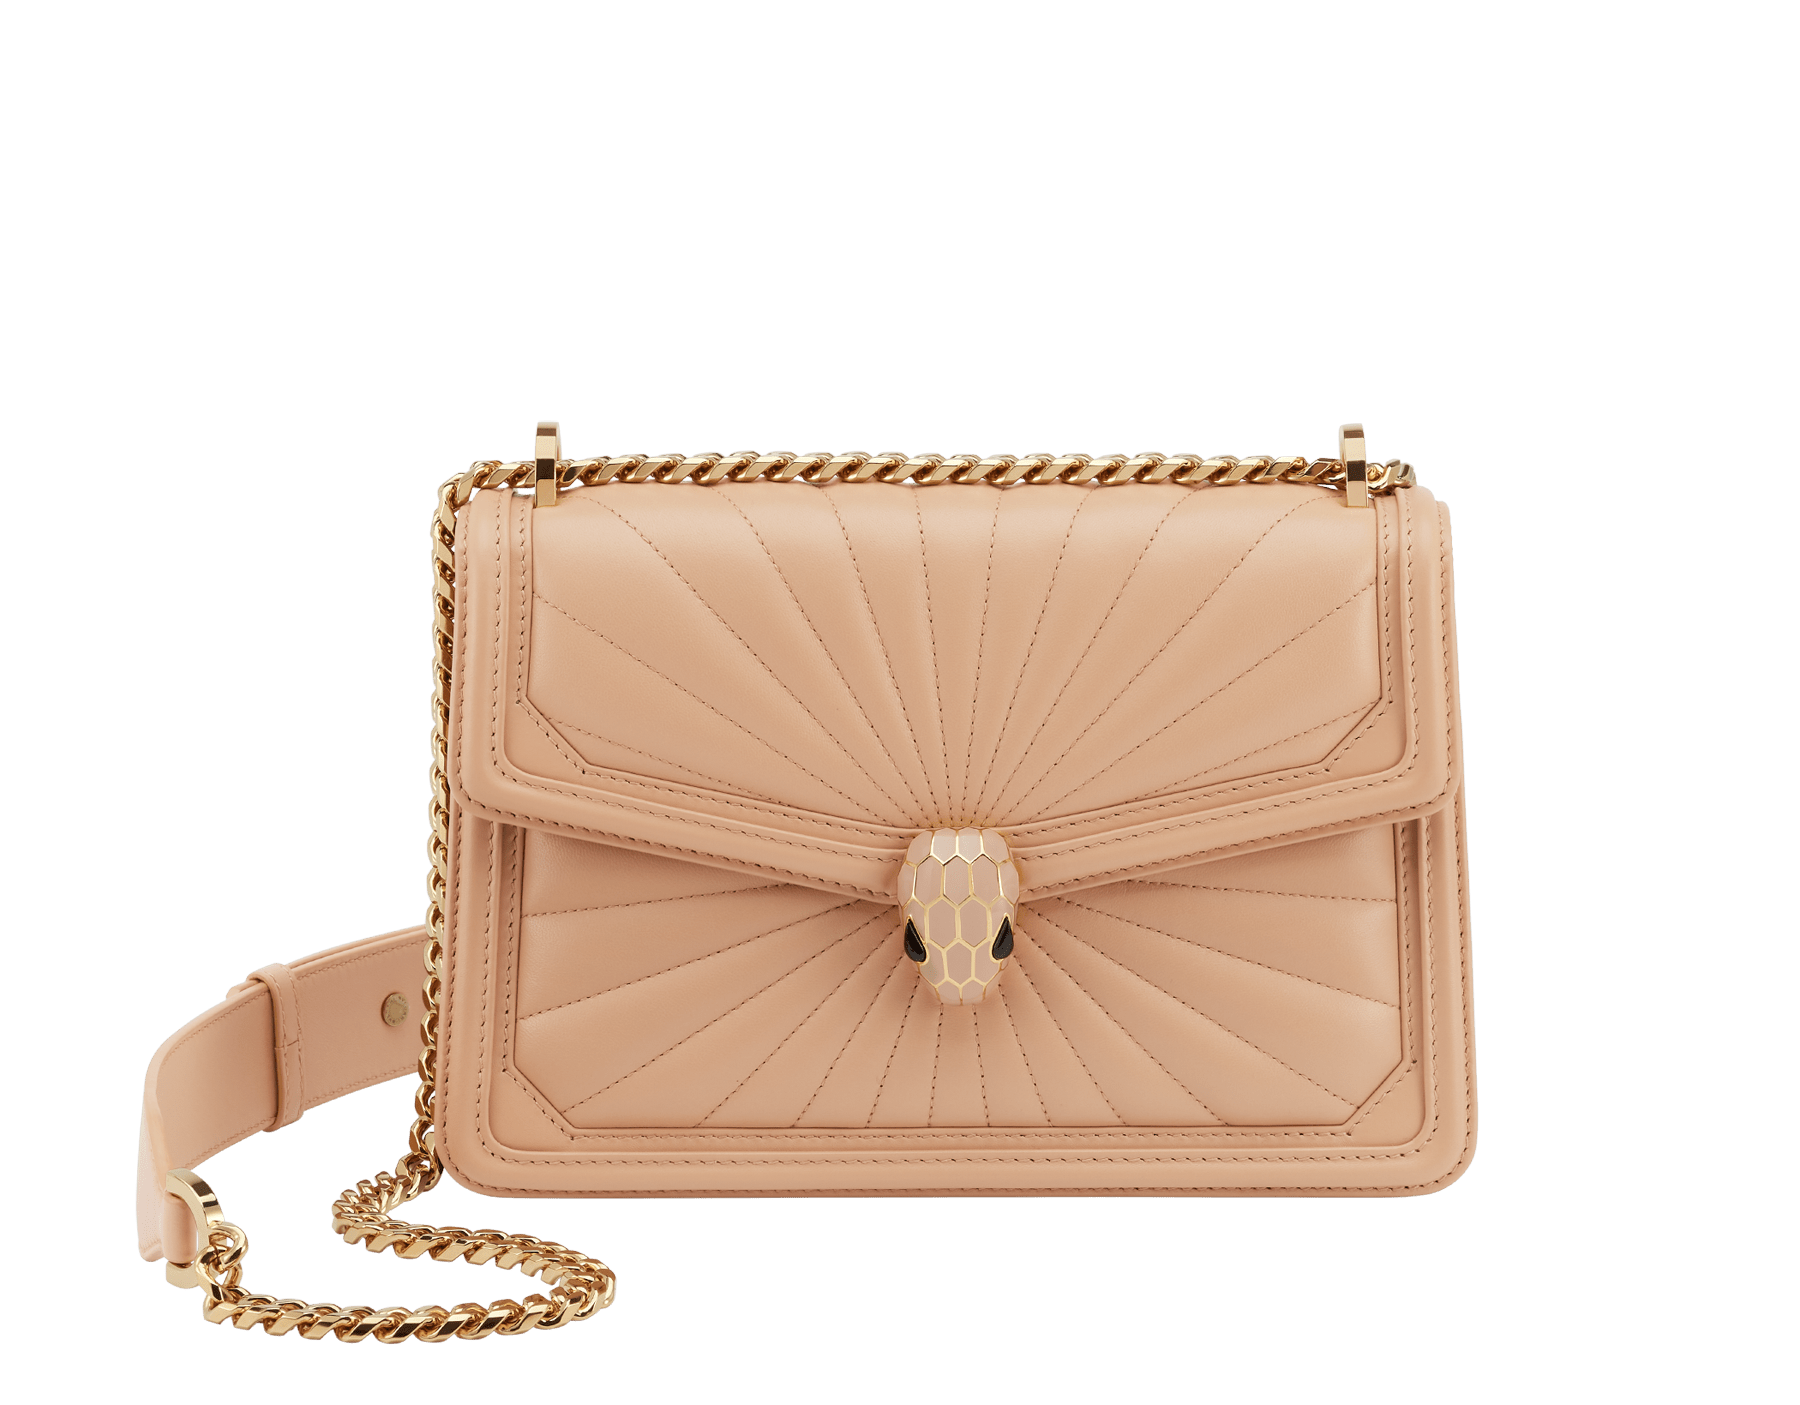 Serpenti Diamond Blast small shoulder bag in ivory opal Sunshine quilted nappa leather with black nappa leather lining. Captivating snakehead closure in light gold-plated brass embellished with matte and shiny ivory opal enamel scales and black onyx eyes. 922-SQ image 1